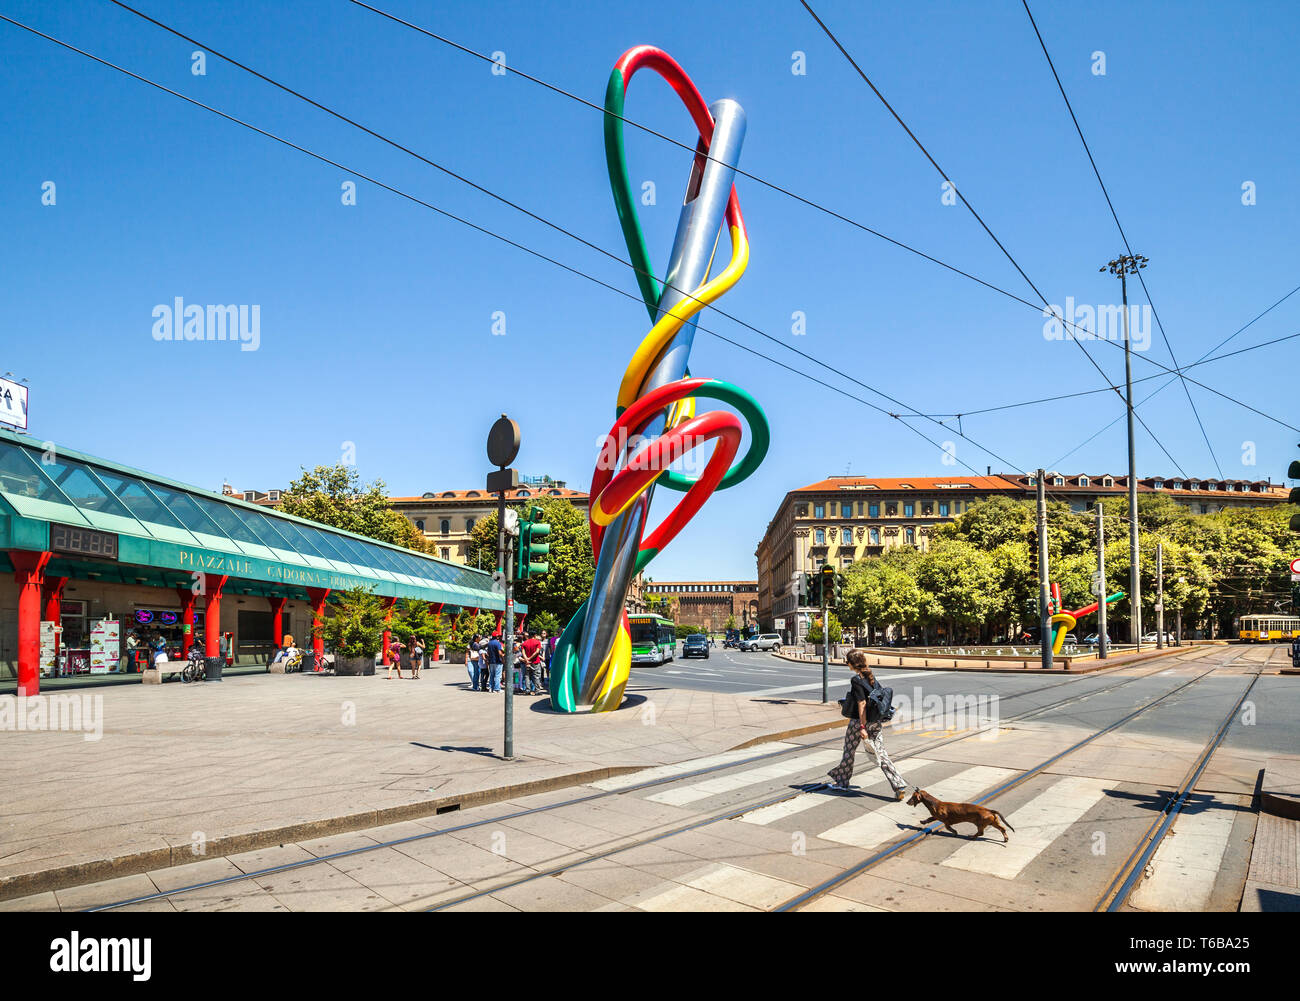 Needle sculpture of Cadorna square, in Milan. Stock Photo